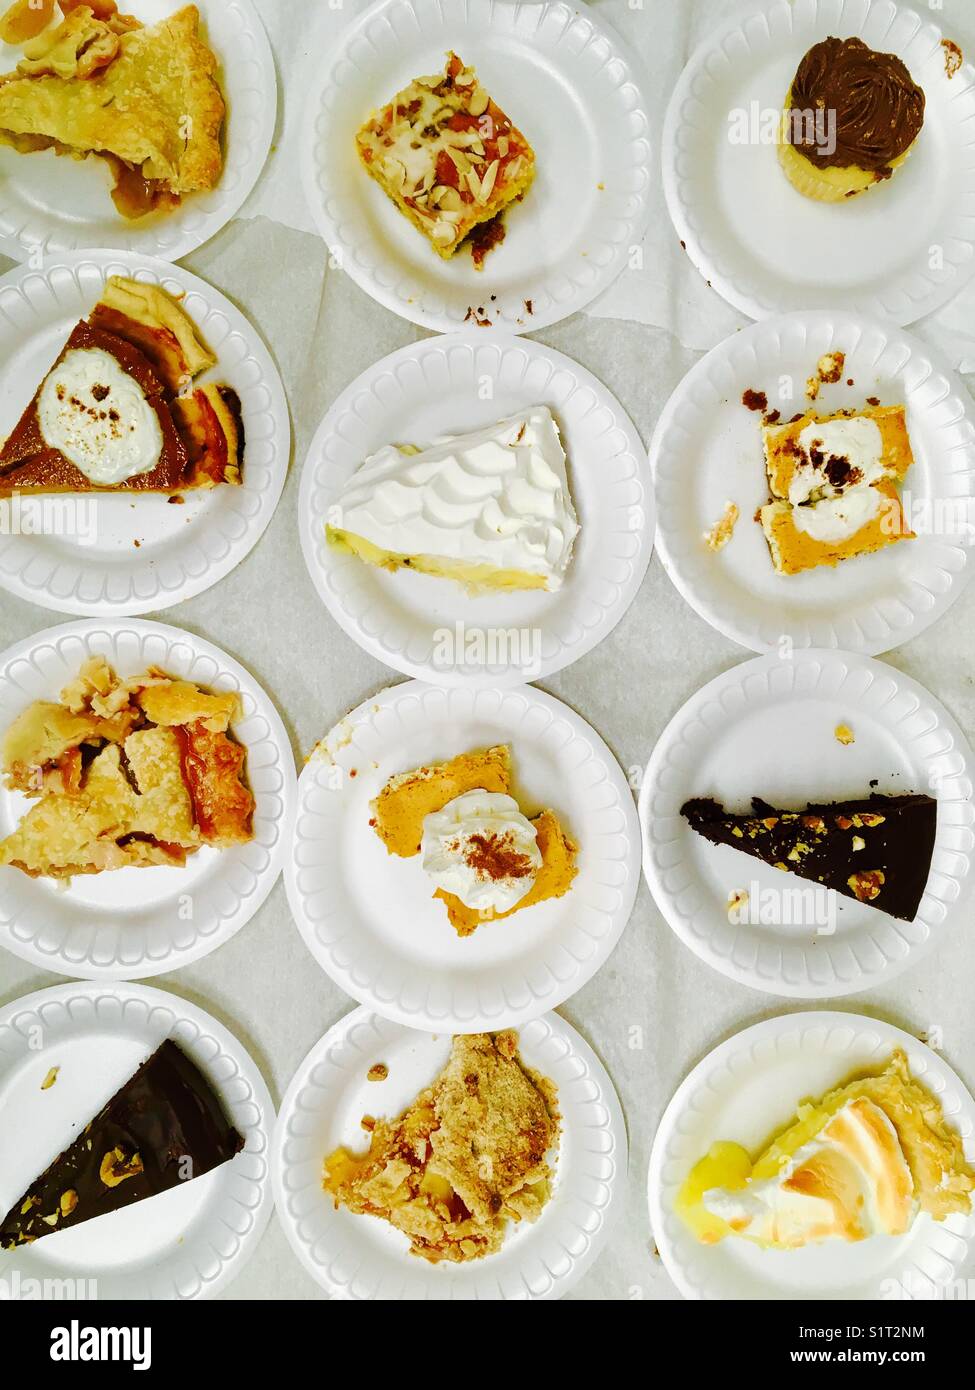 Table of delicious desserts and pies Stock Photo